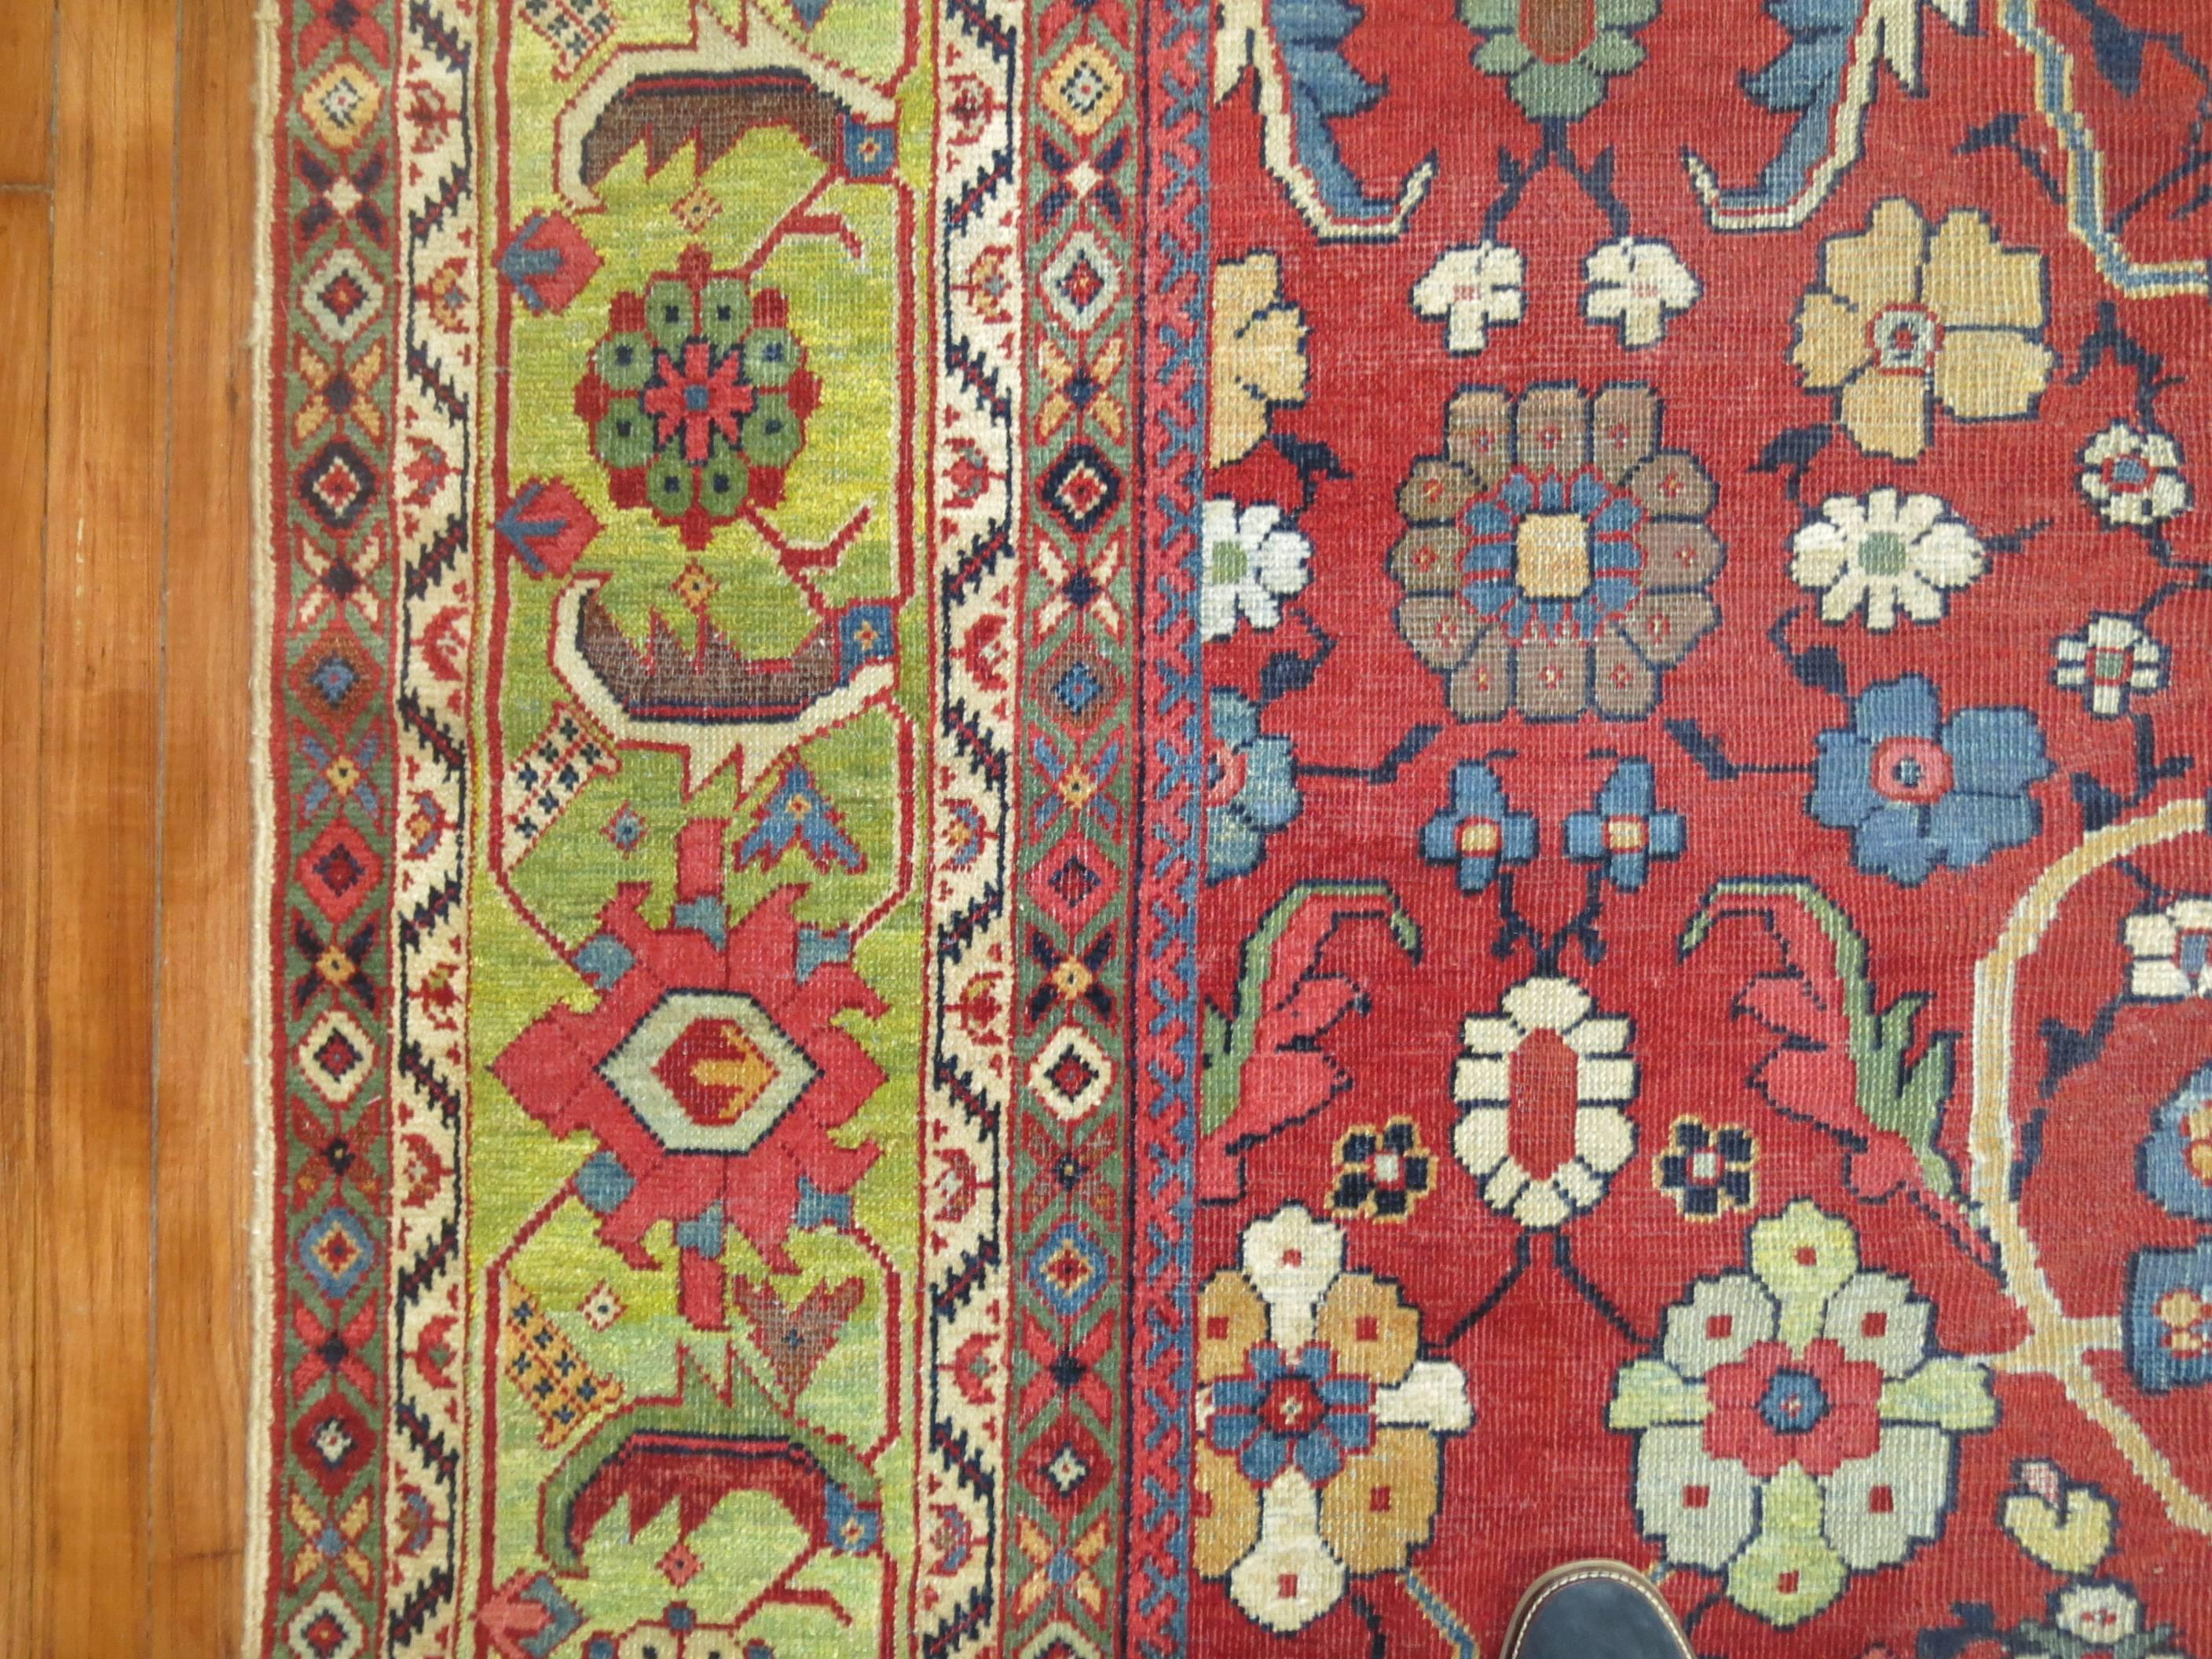 An early 20th century Persian Mahal rug with a red ground and light green abrashed border.

Exemplary oversize Mahal antique carpets are preferred by many for their originality and inspired artistry and have forged an important niche in today’s